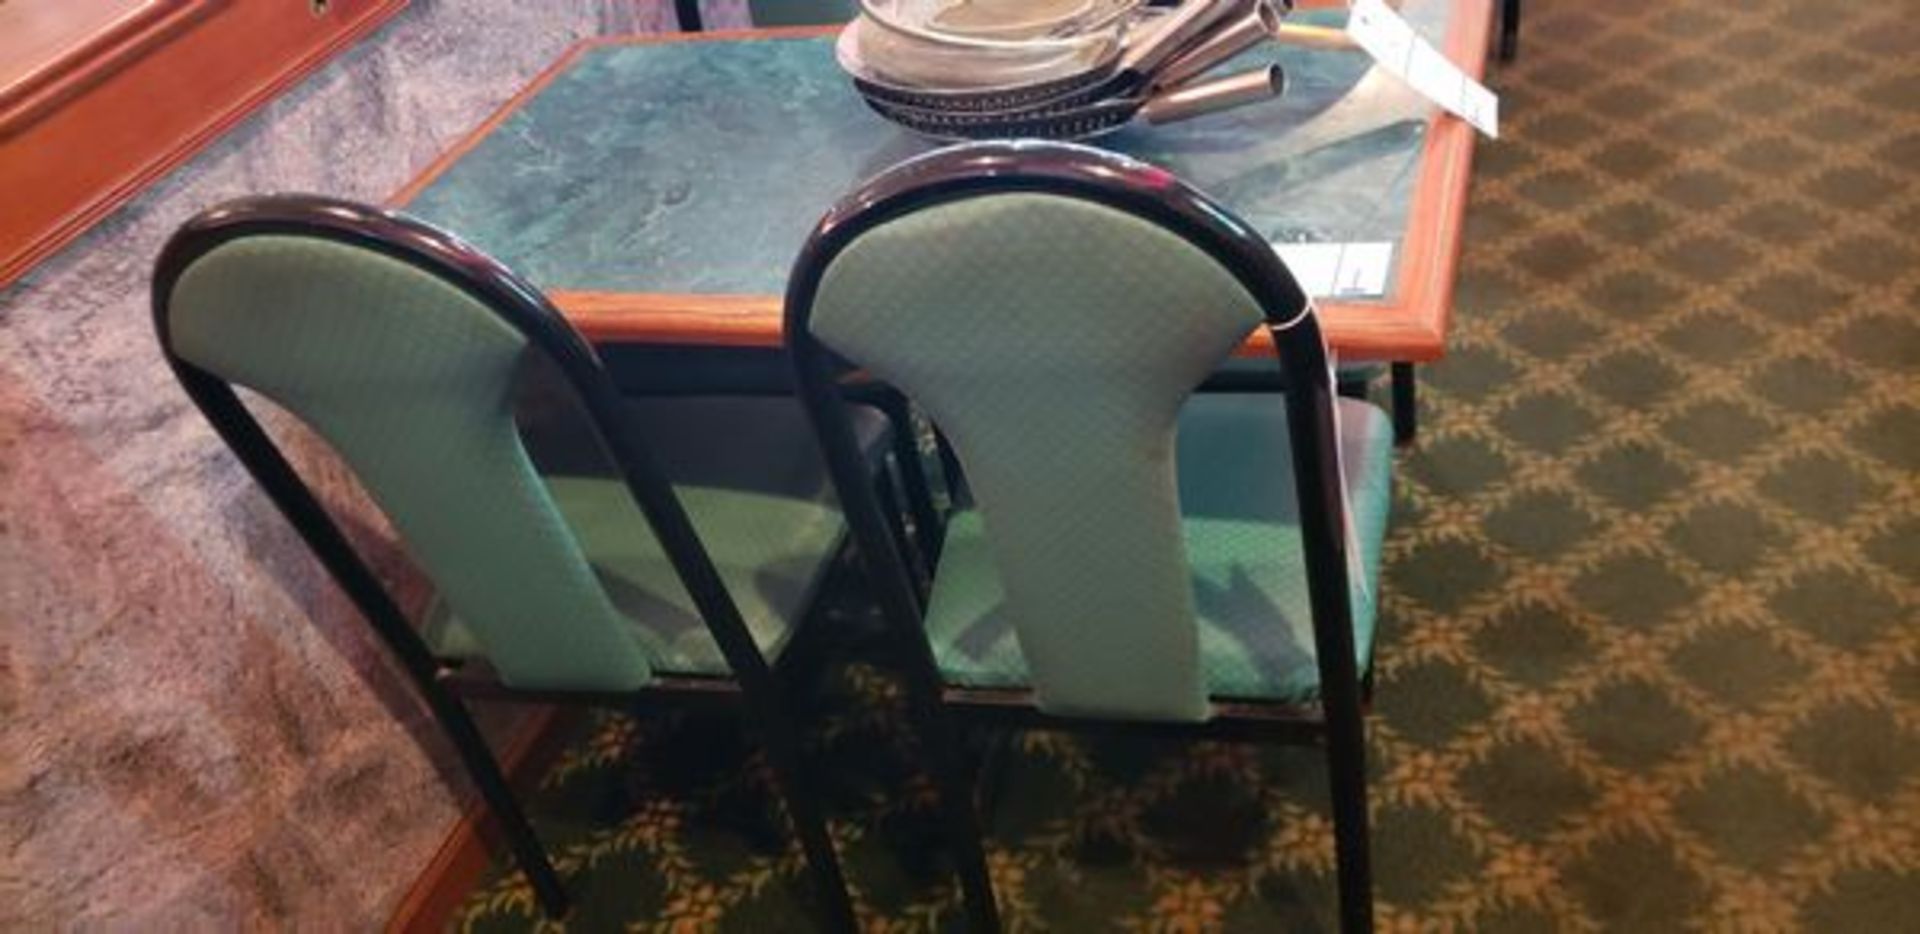 UPHOLSTERED METAL FRAME GREEN AND BLACK DINING CHAIRS - Image 2 of 4